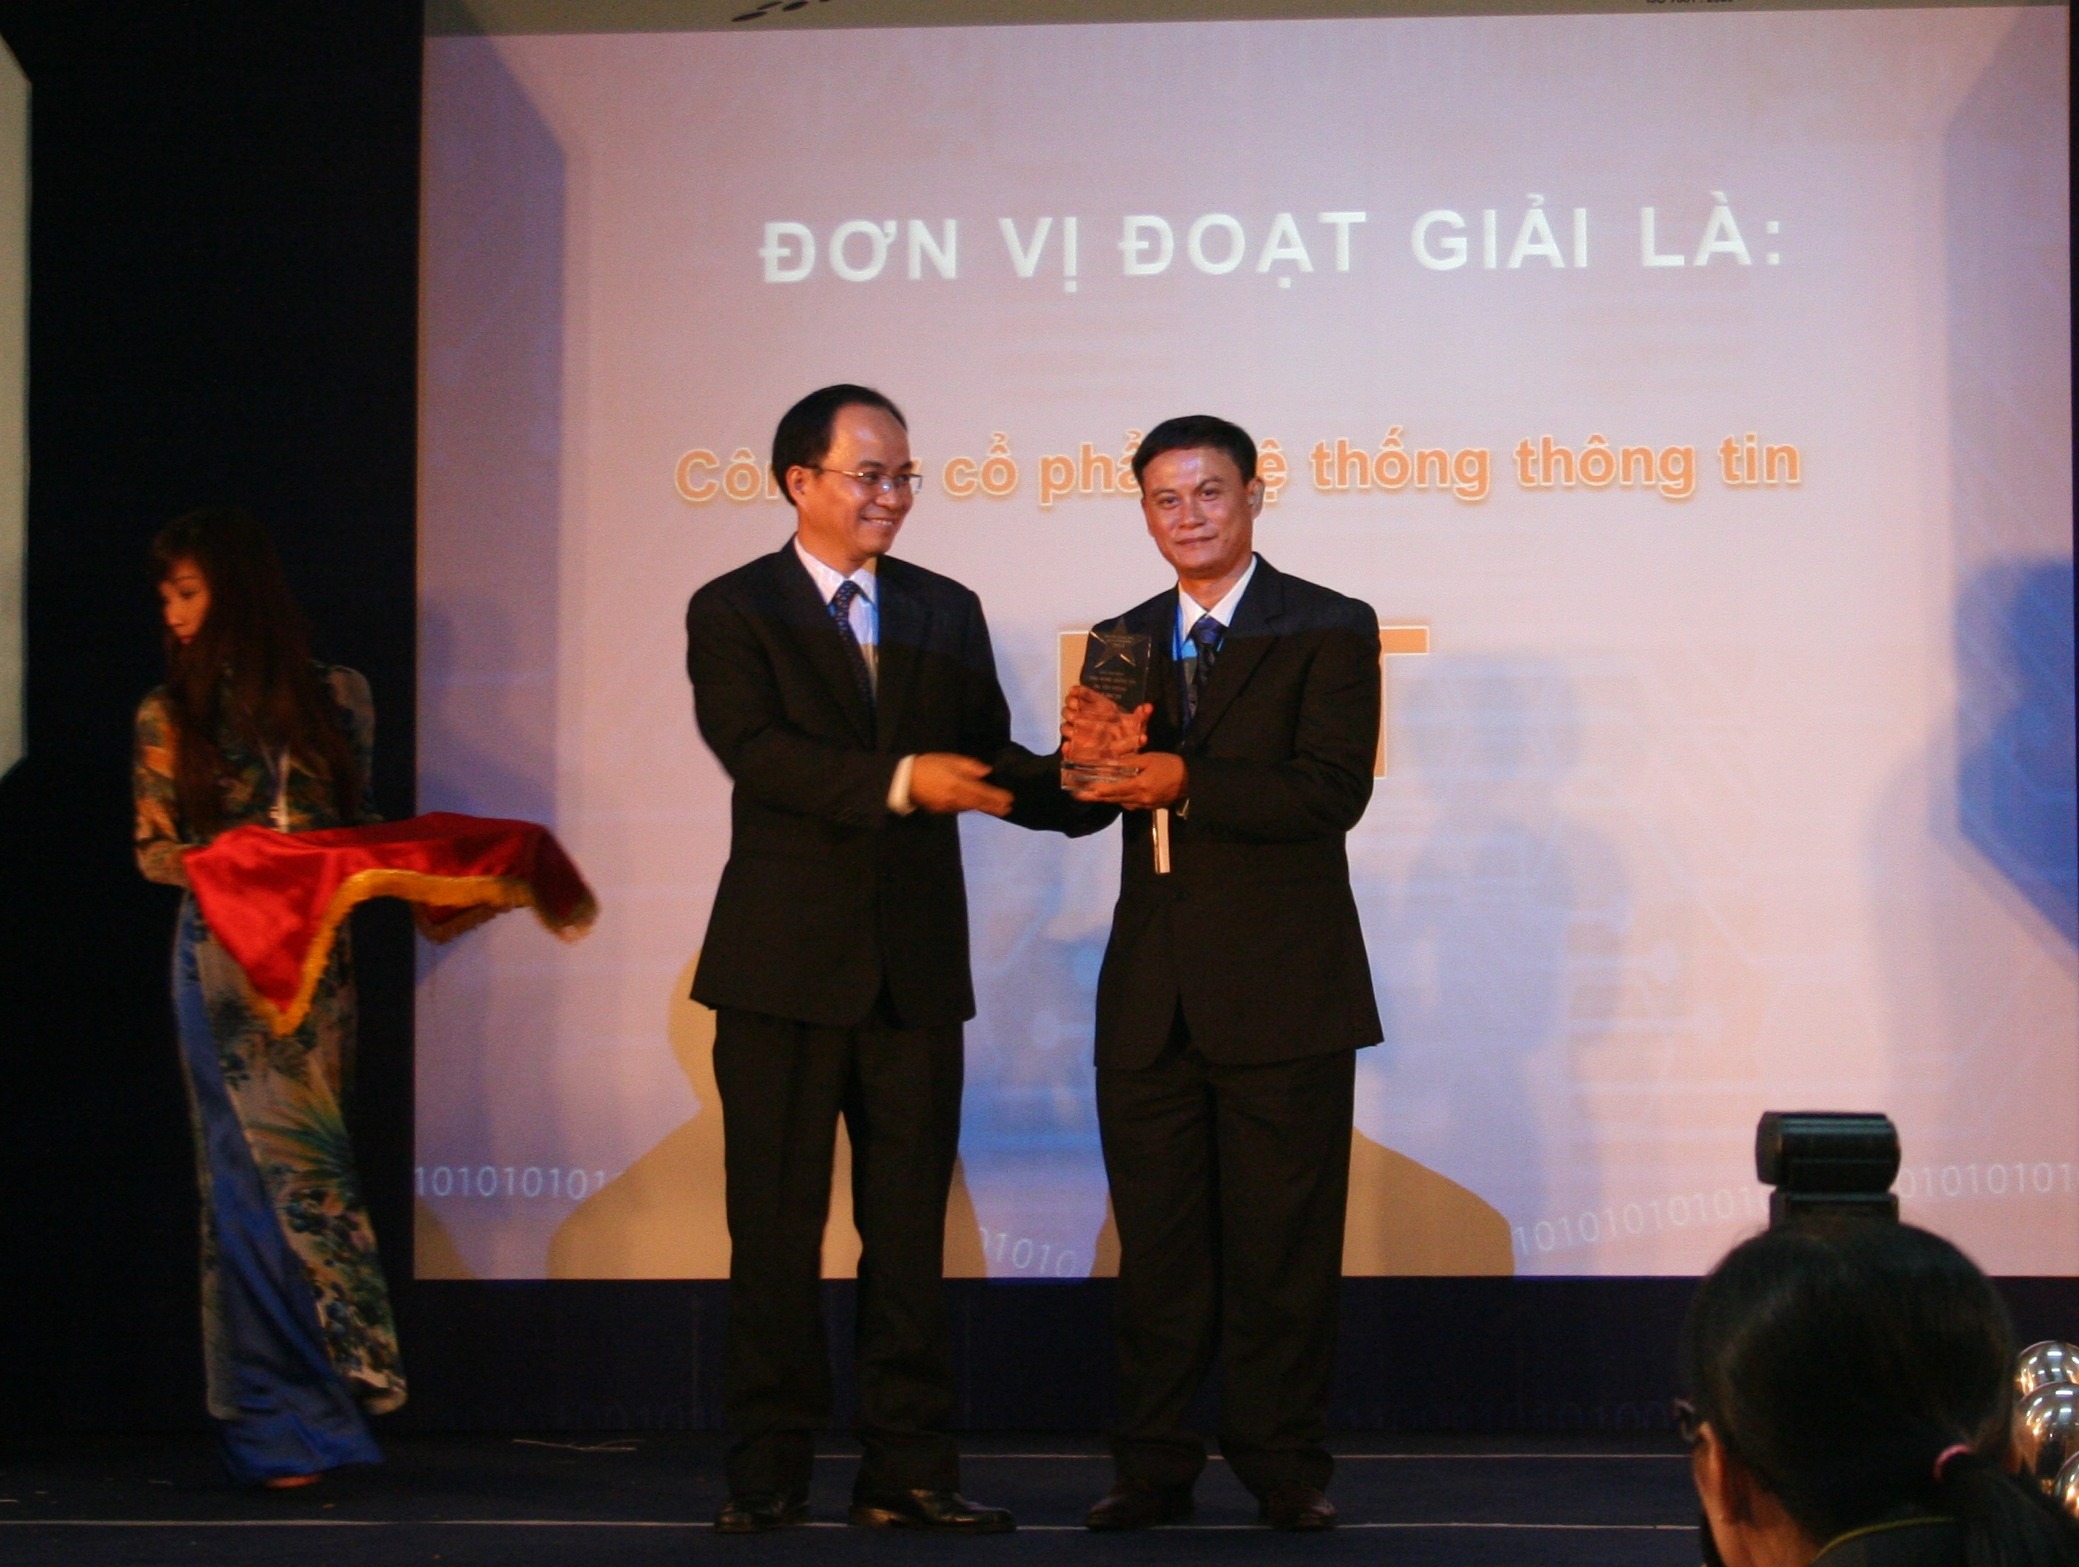 Ho Chi Minh City 3rd Information and Communications Technology Awards – Hospital Management System (FPT.eHospital)